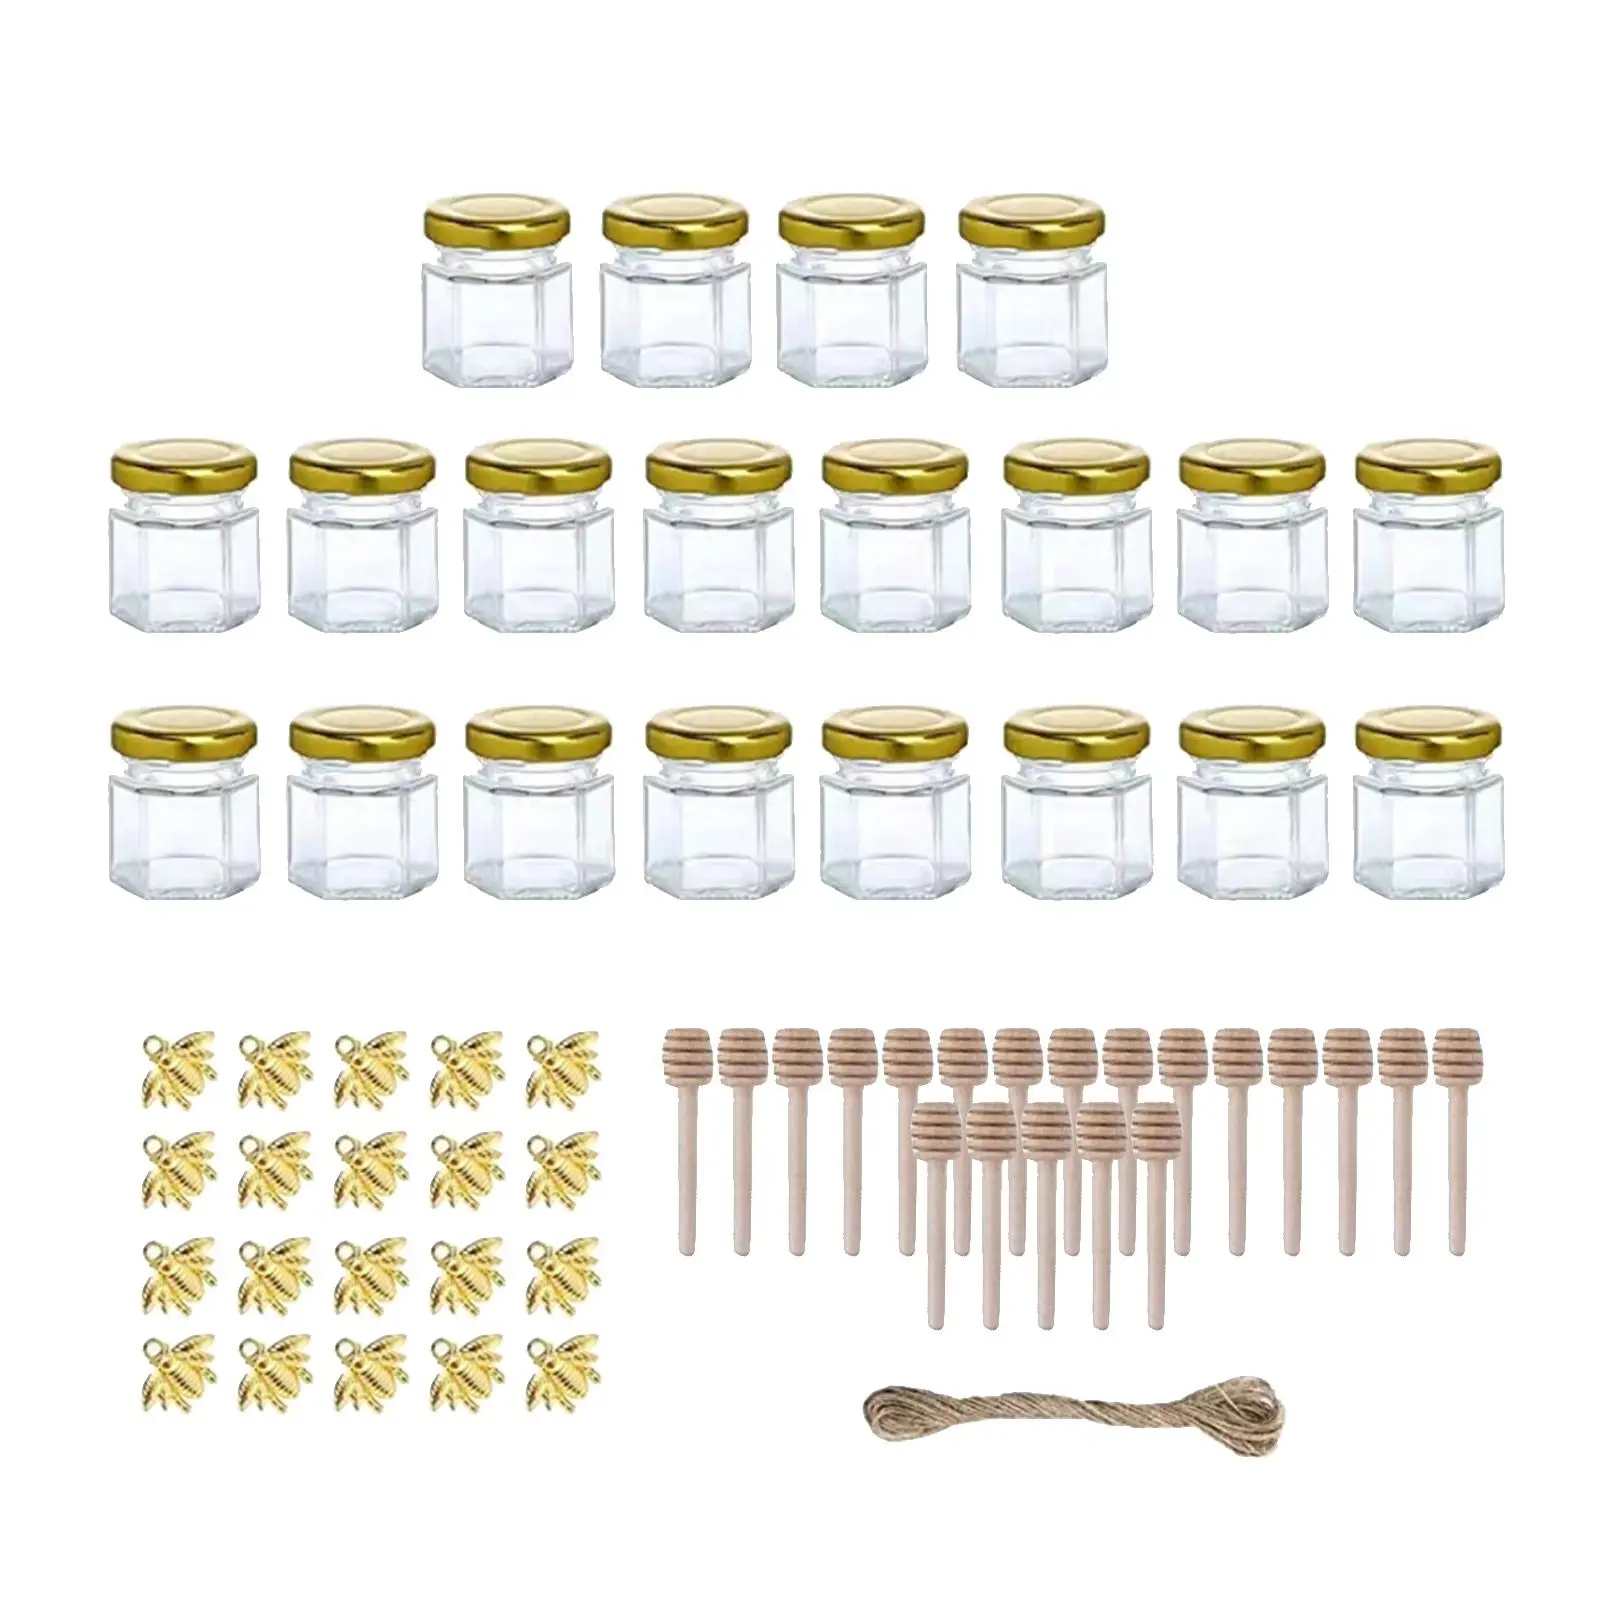 20 Pieces Small Glass Jars 45ml/1.5oz for Canning, Storing, and Decorative Purpose Candle Making Liquids Honey Wedding